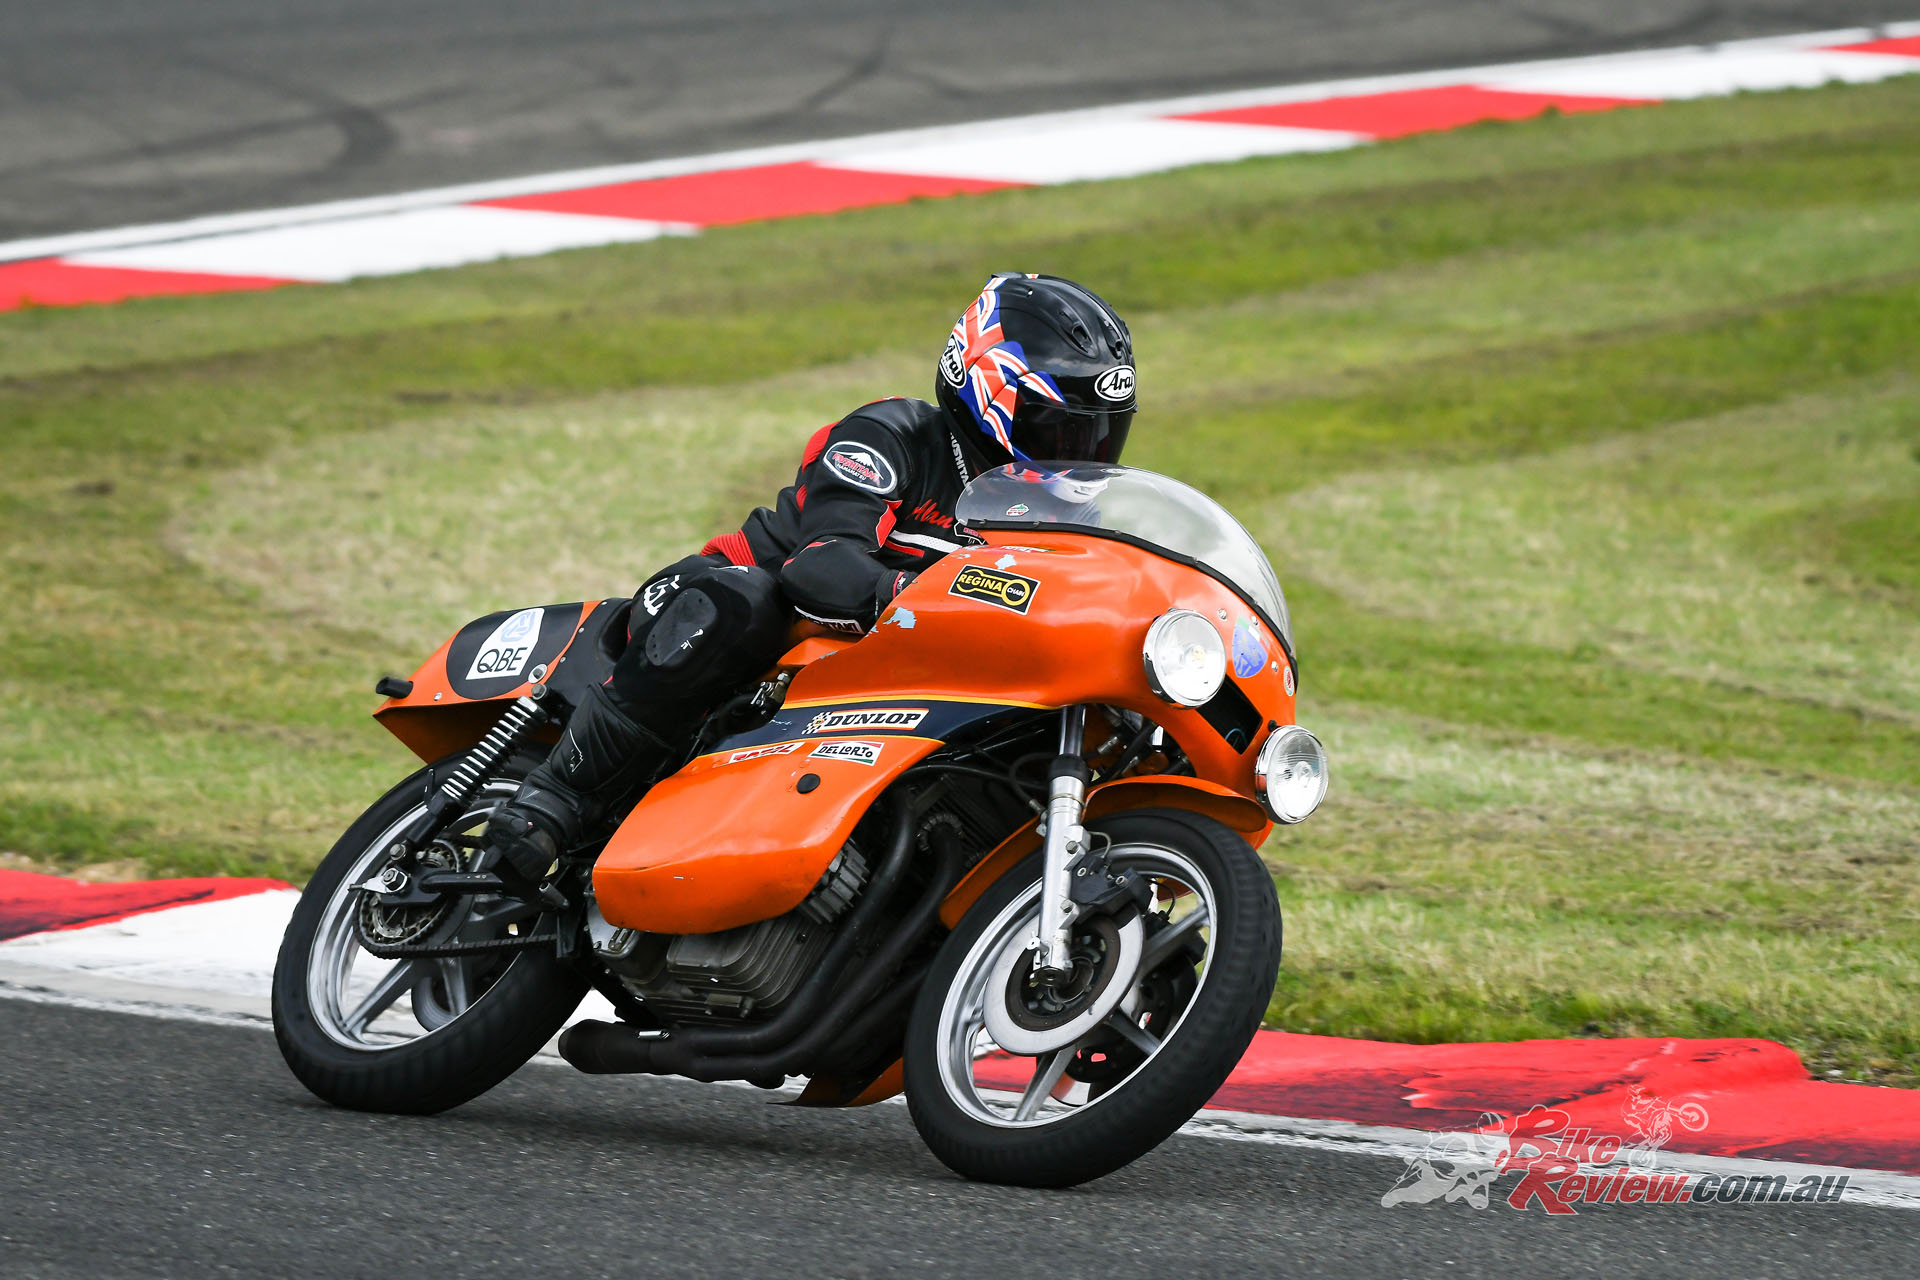 The 3C 1000 was made to be comfortable for endurance racing, not for hanging off the bike.